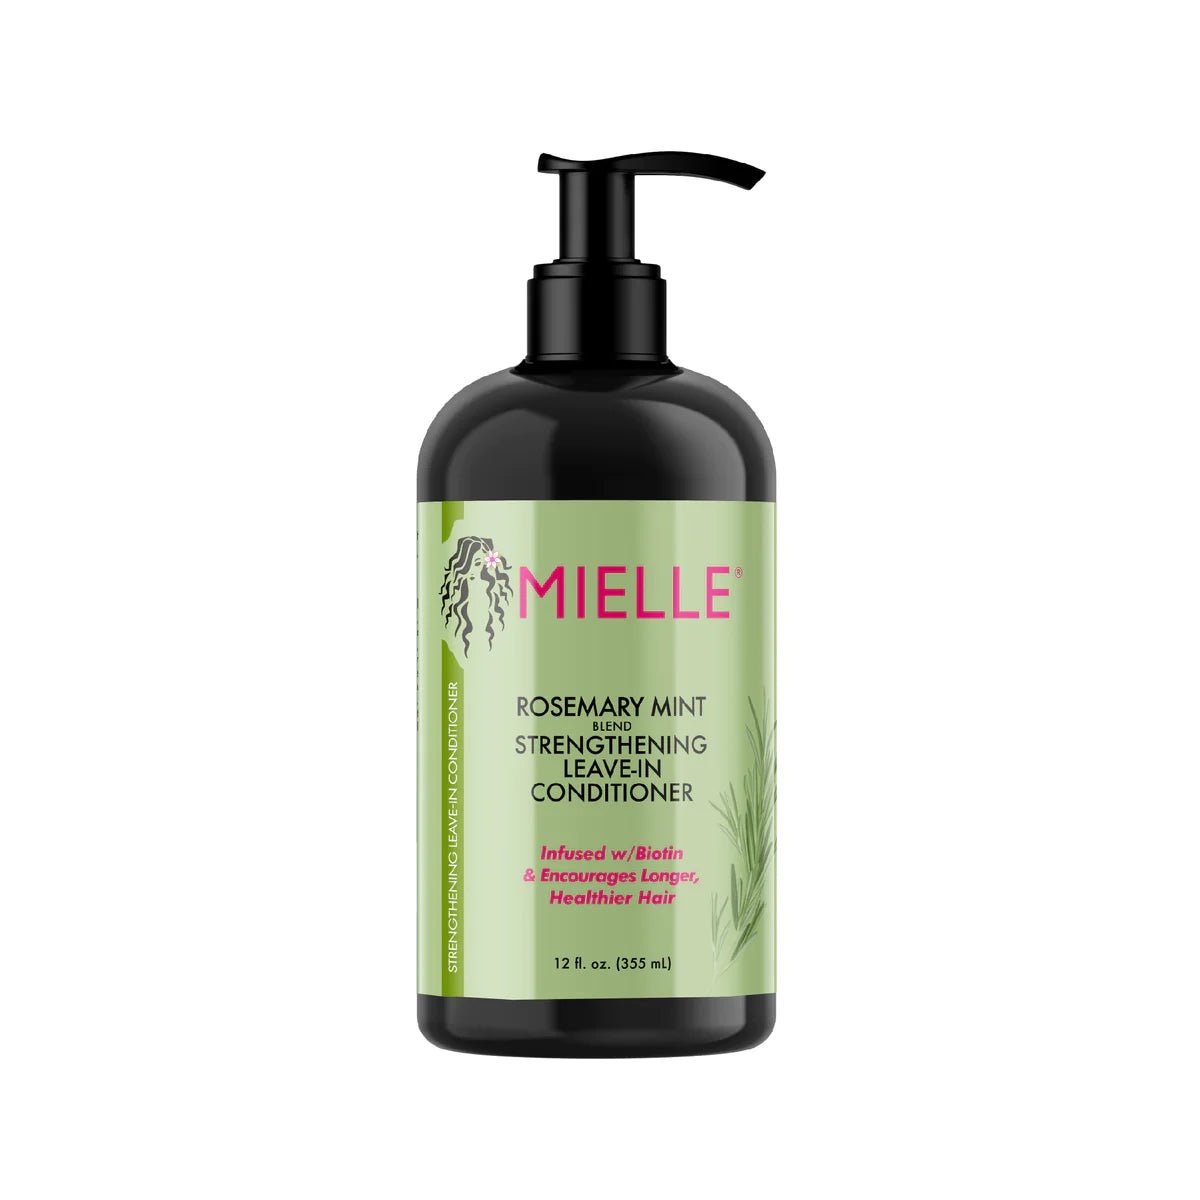 Mielle Rosemary Mint Strengthening Leave - In conditioner - Seraphim Beauty